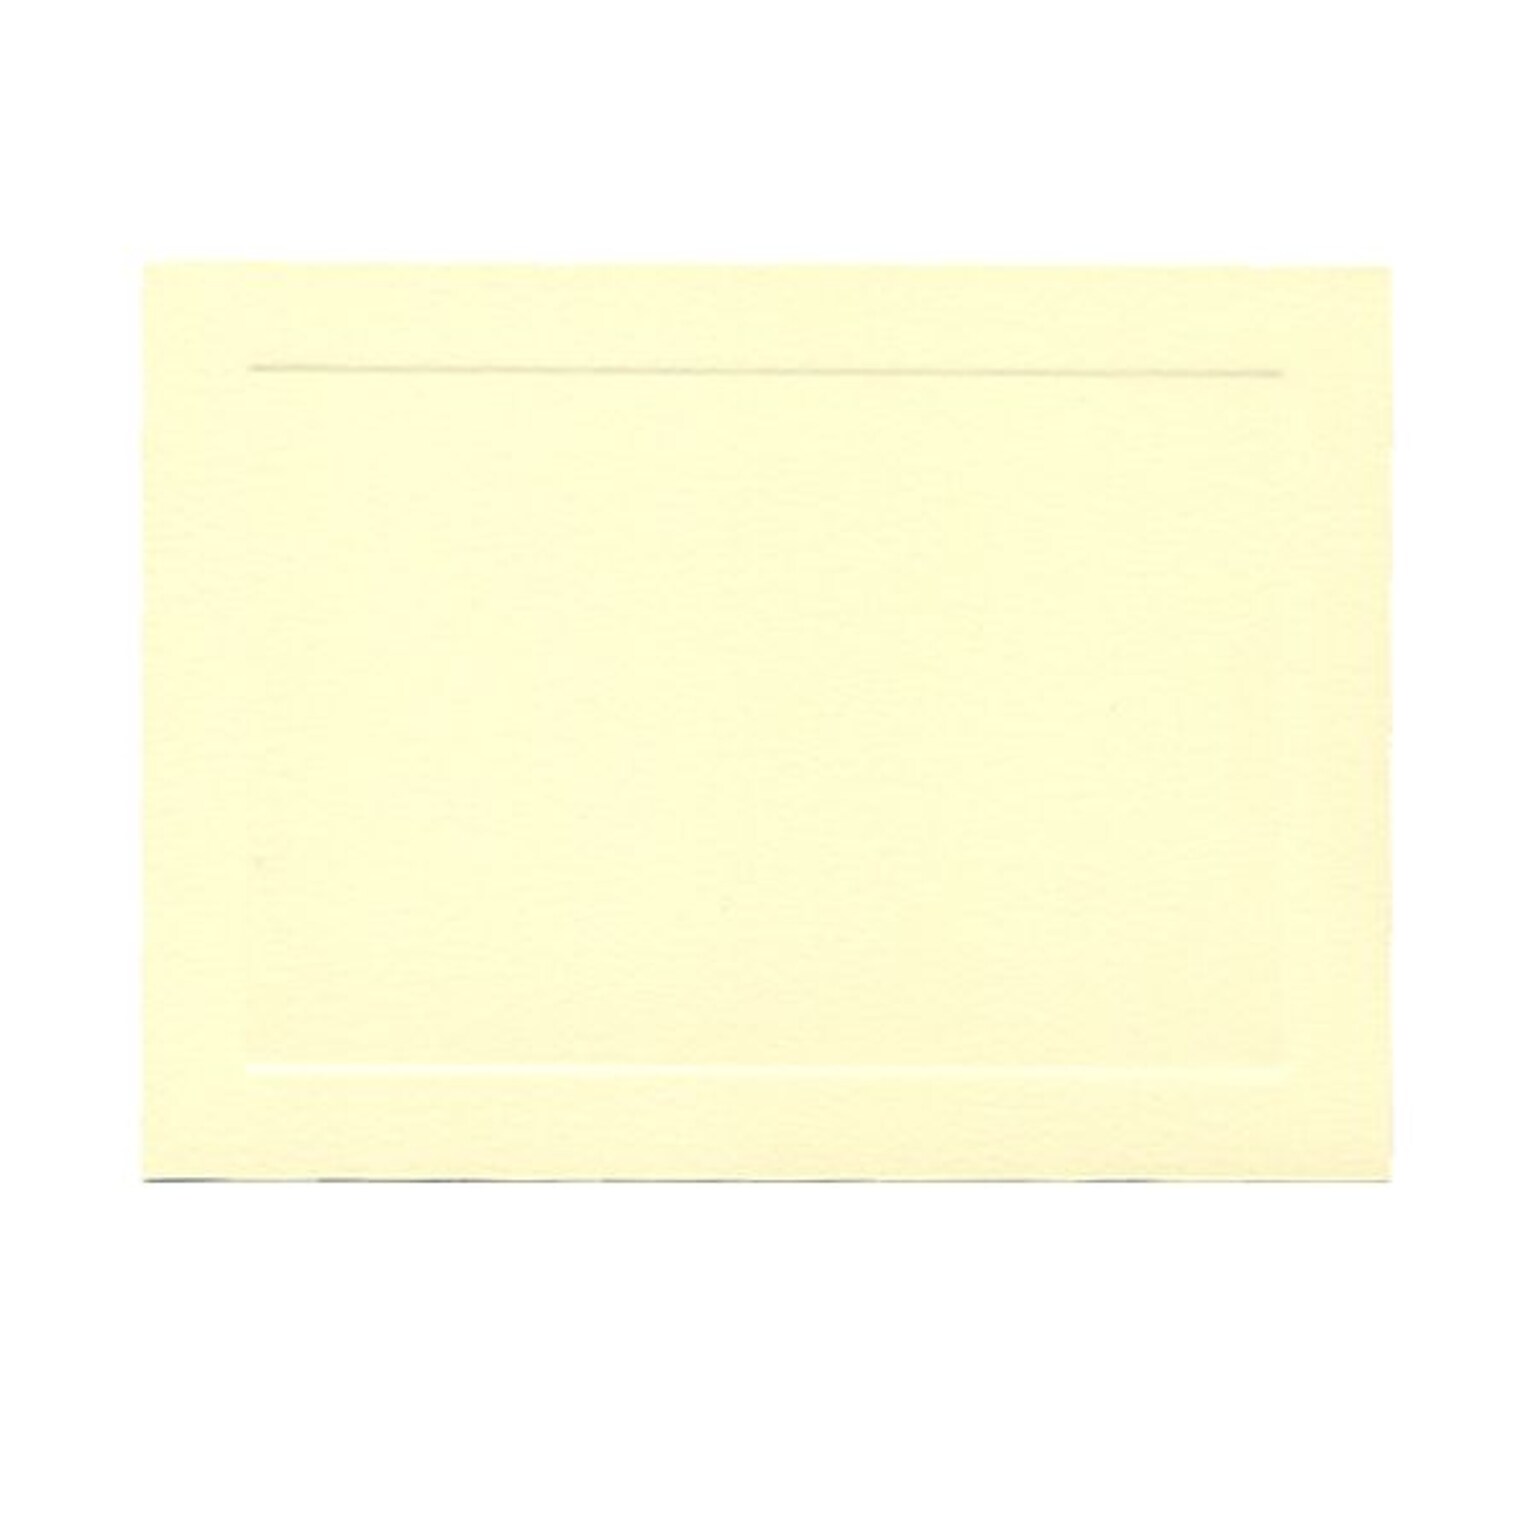 JAM Paper® Blank Note Cards with Panel Border, A7 size, 5 1/8 x 7, Ivory, 500/box (98040B)